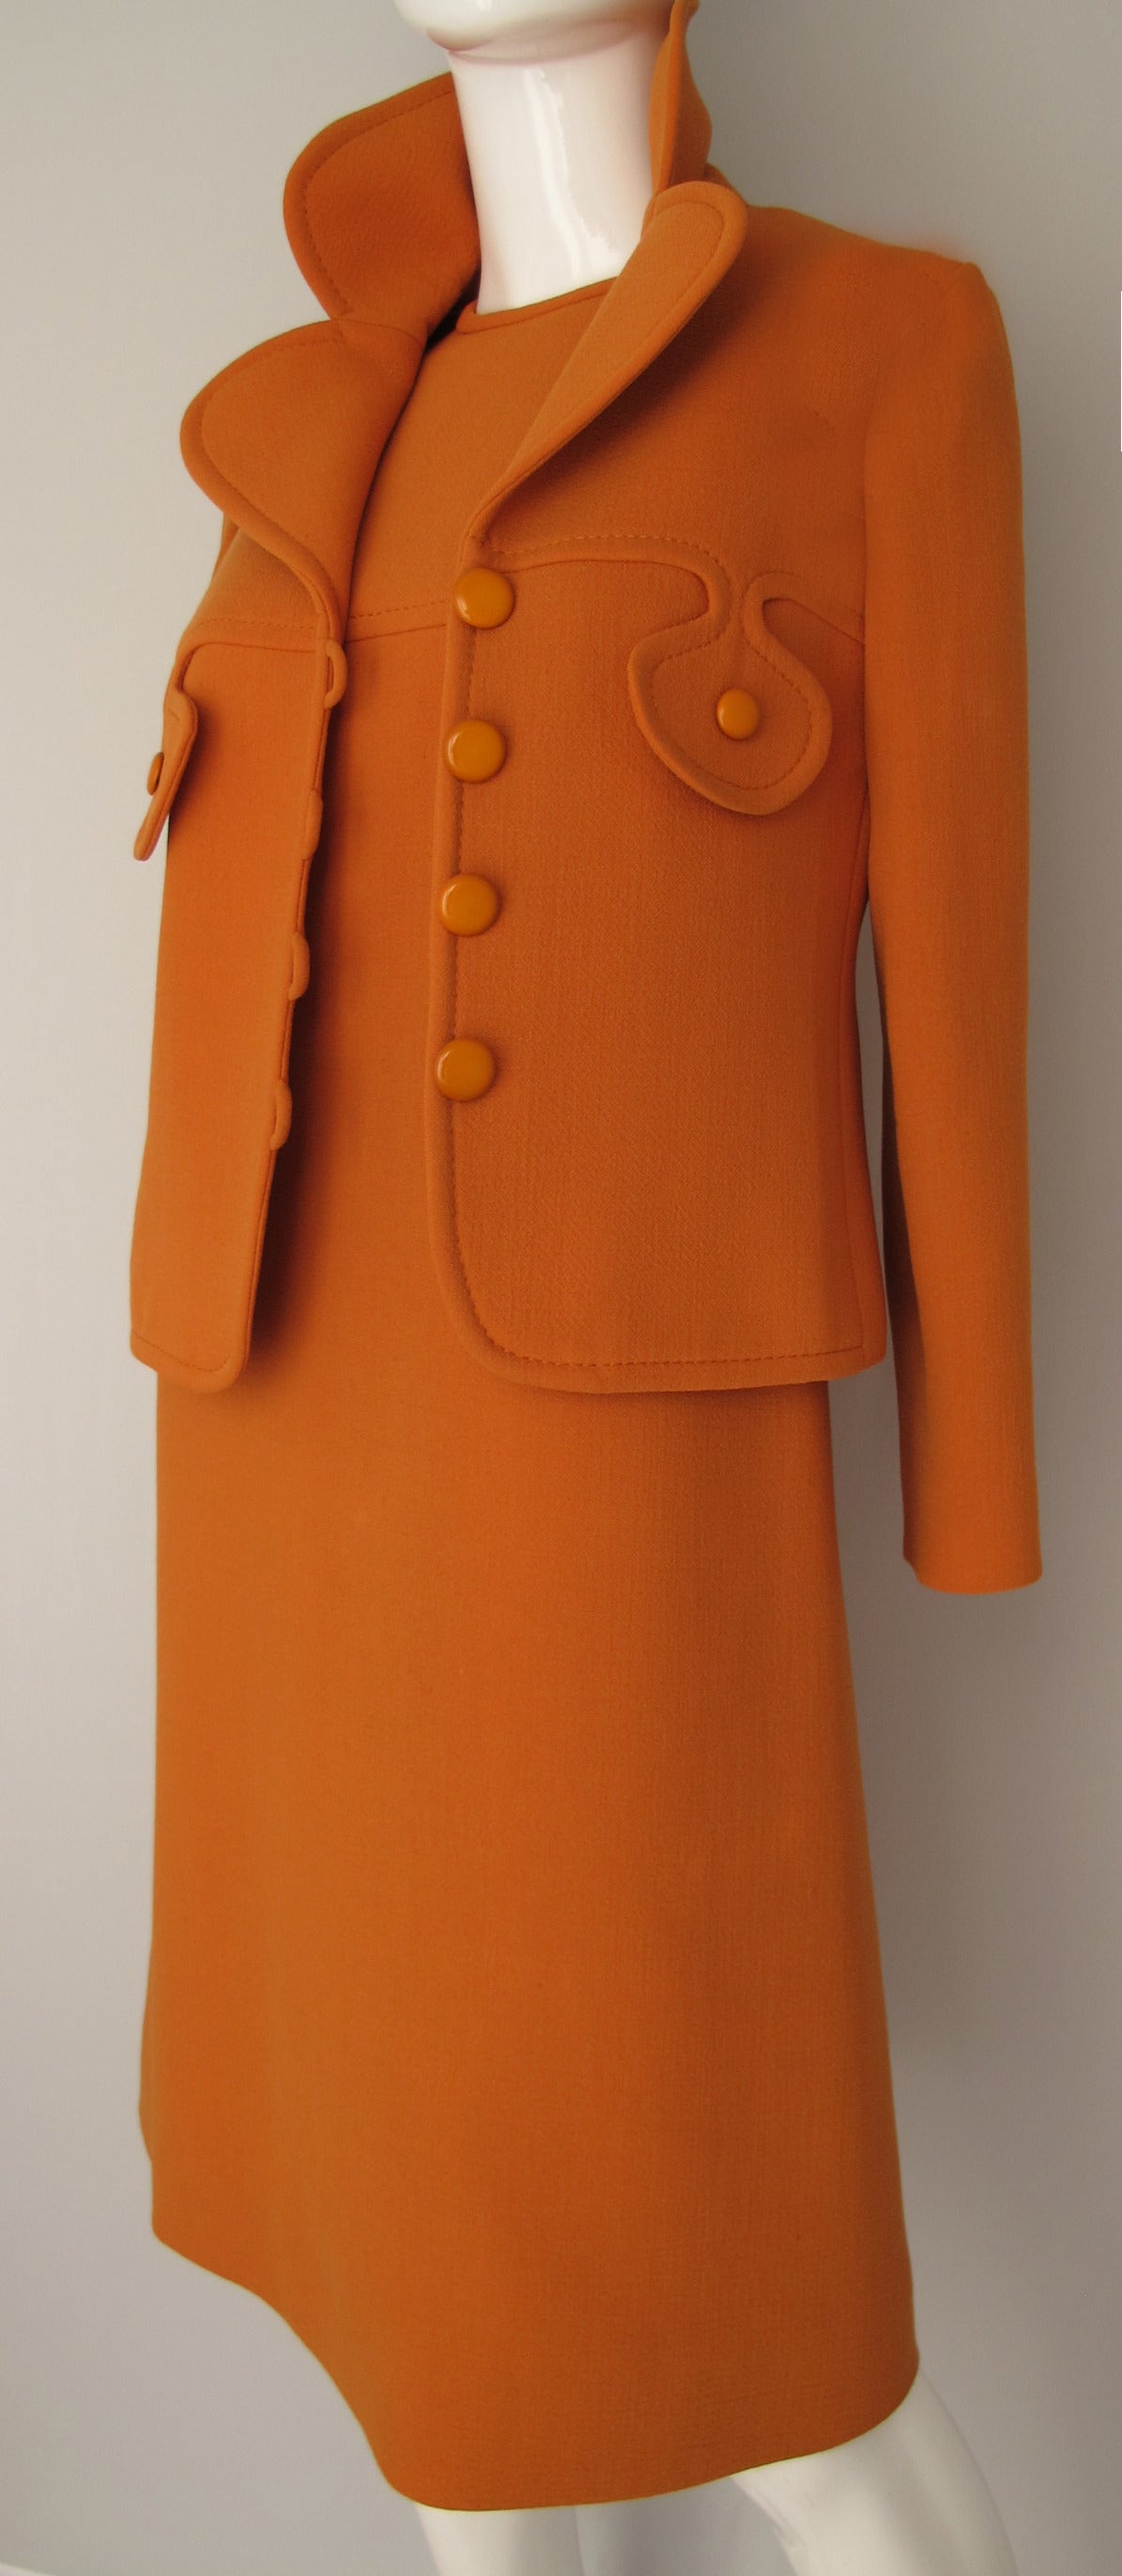 Pierre Cardin Space Age Mod Wool Crepe Jacket and Dress Ensemble ca.1971 1